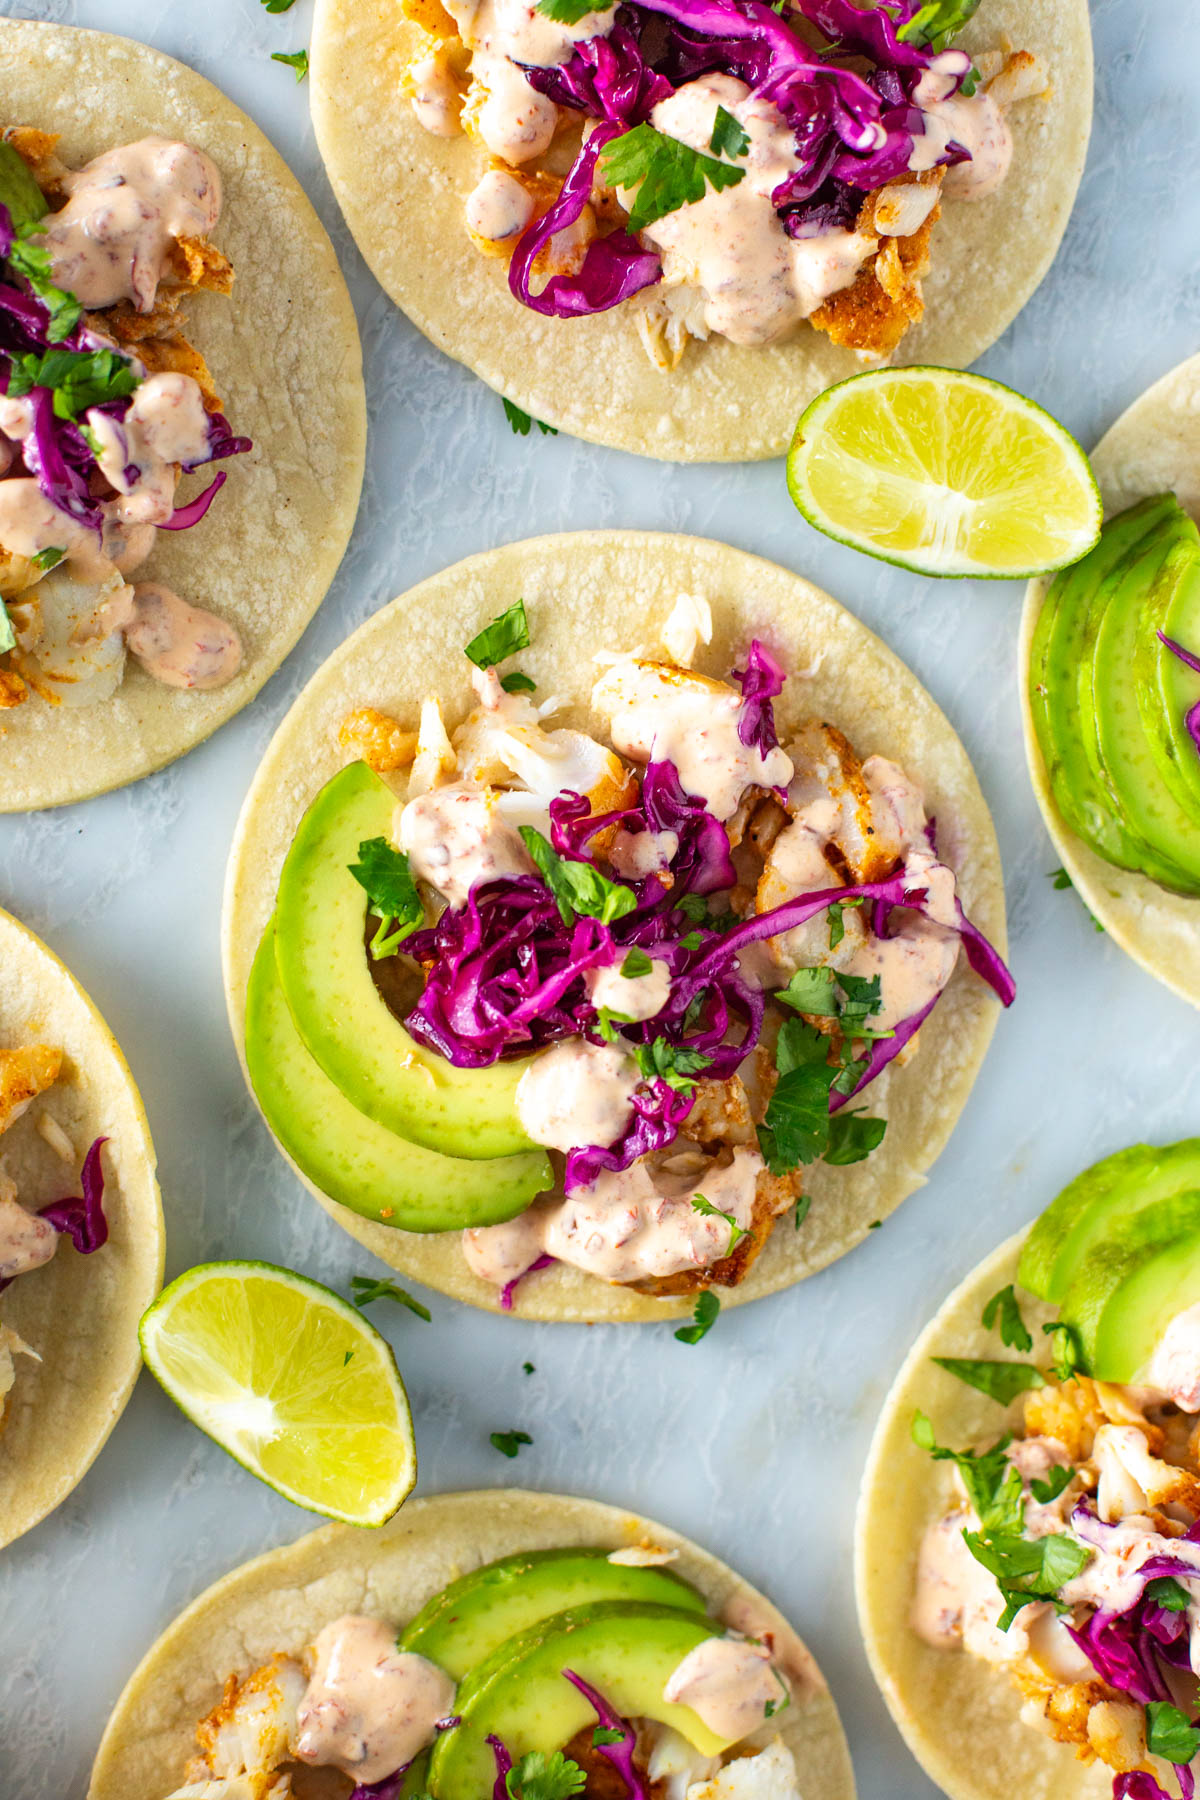 A close-up of homemade fish tacos with chipotle crema on top.